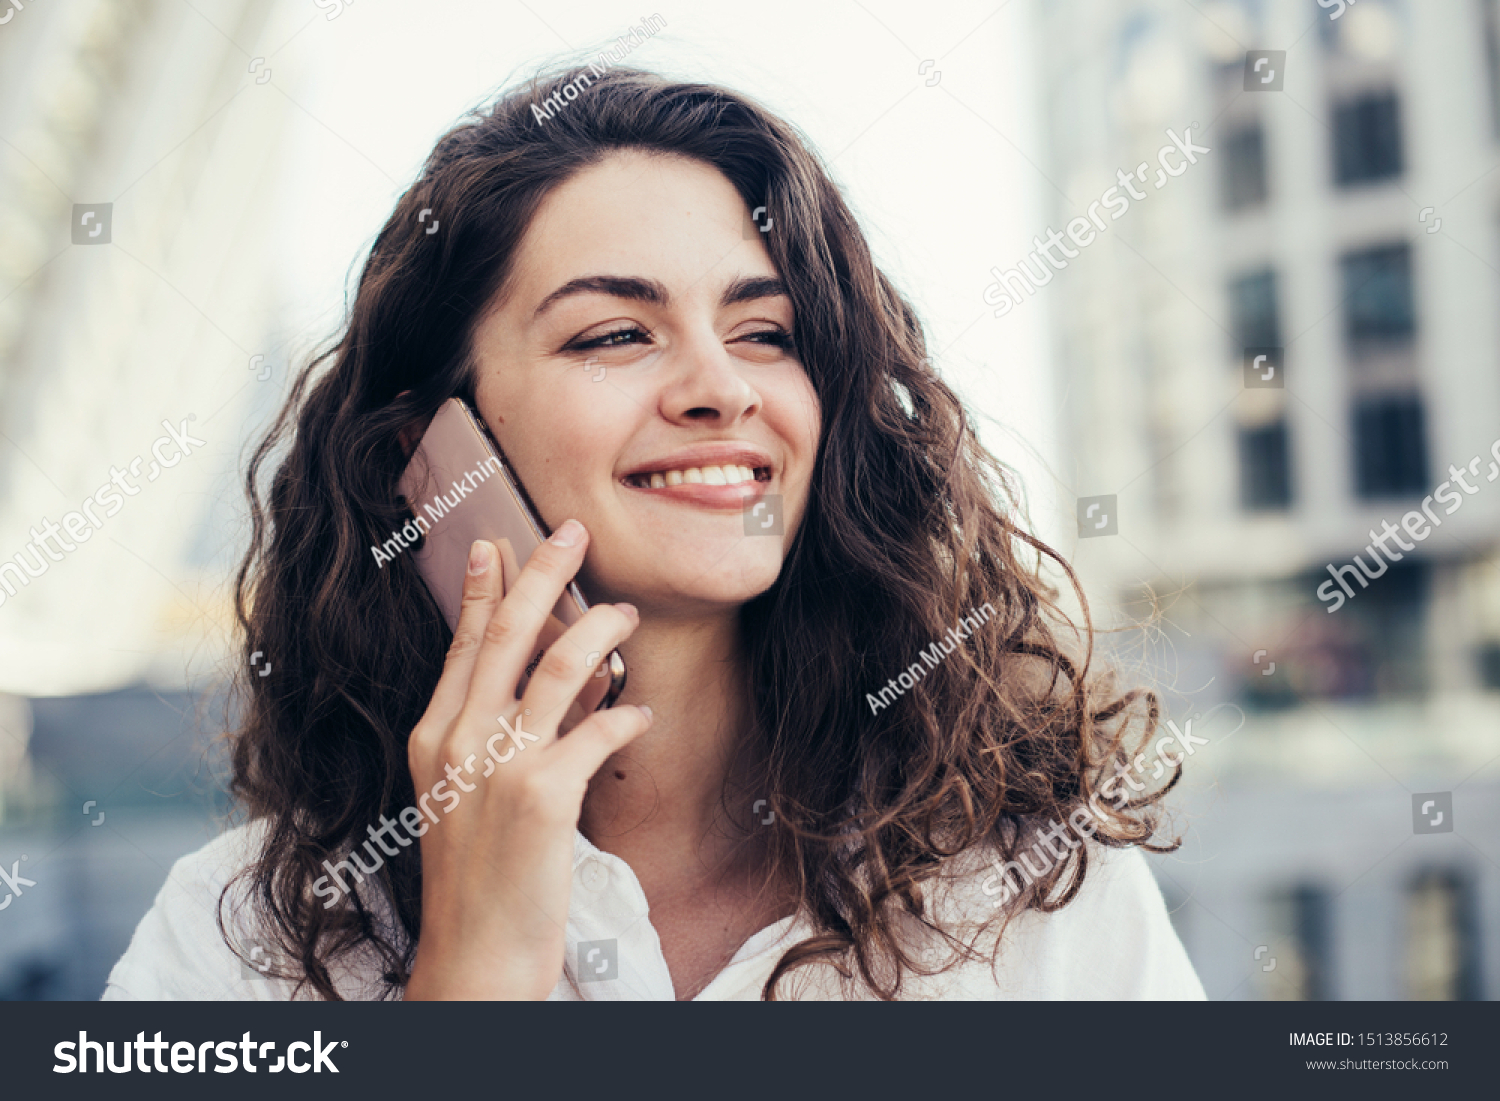 Cheerful pretty young woman talking on phone and look straight ahead. Holding smartphone close to ear. Standing alone outside. White buildings behind. Daylight #1513856612